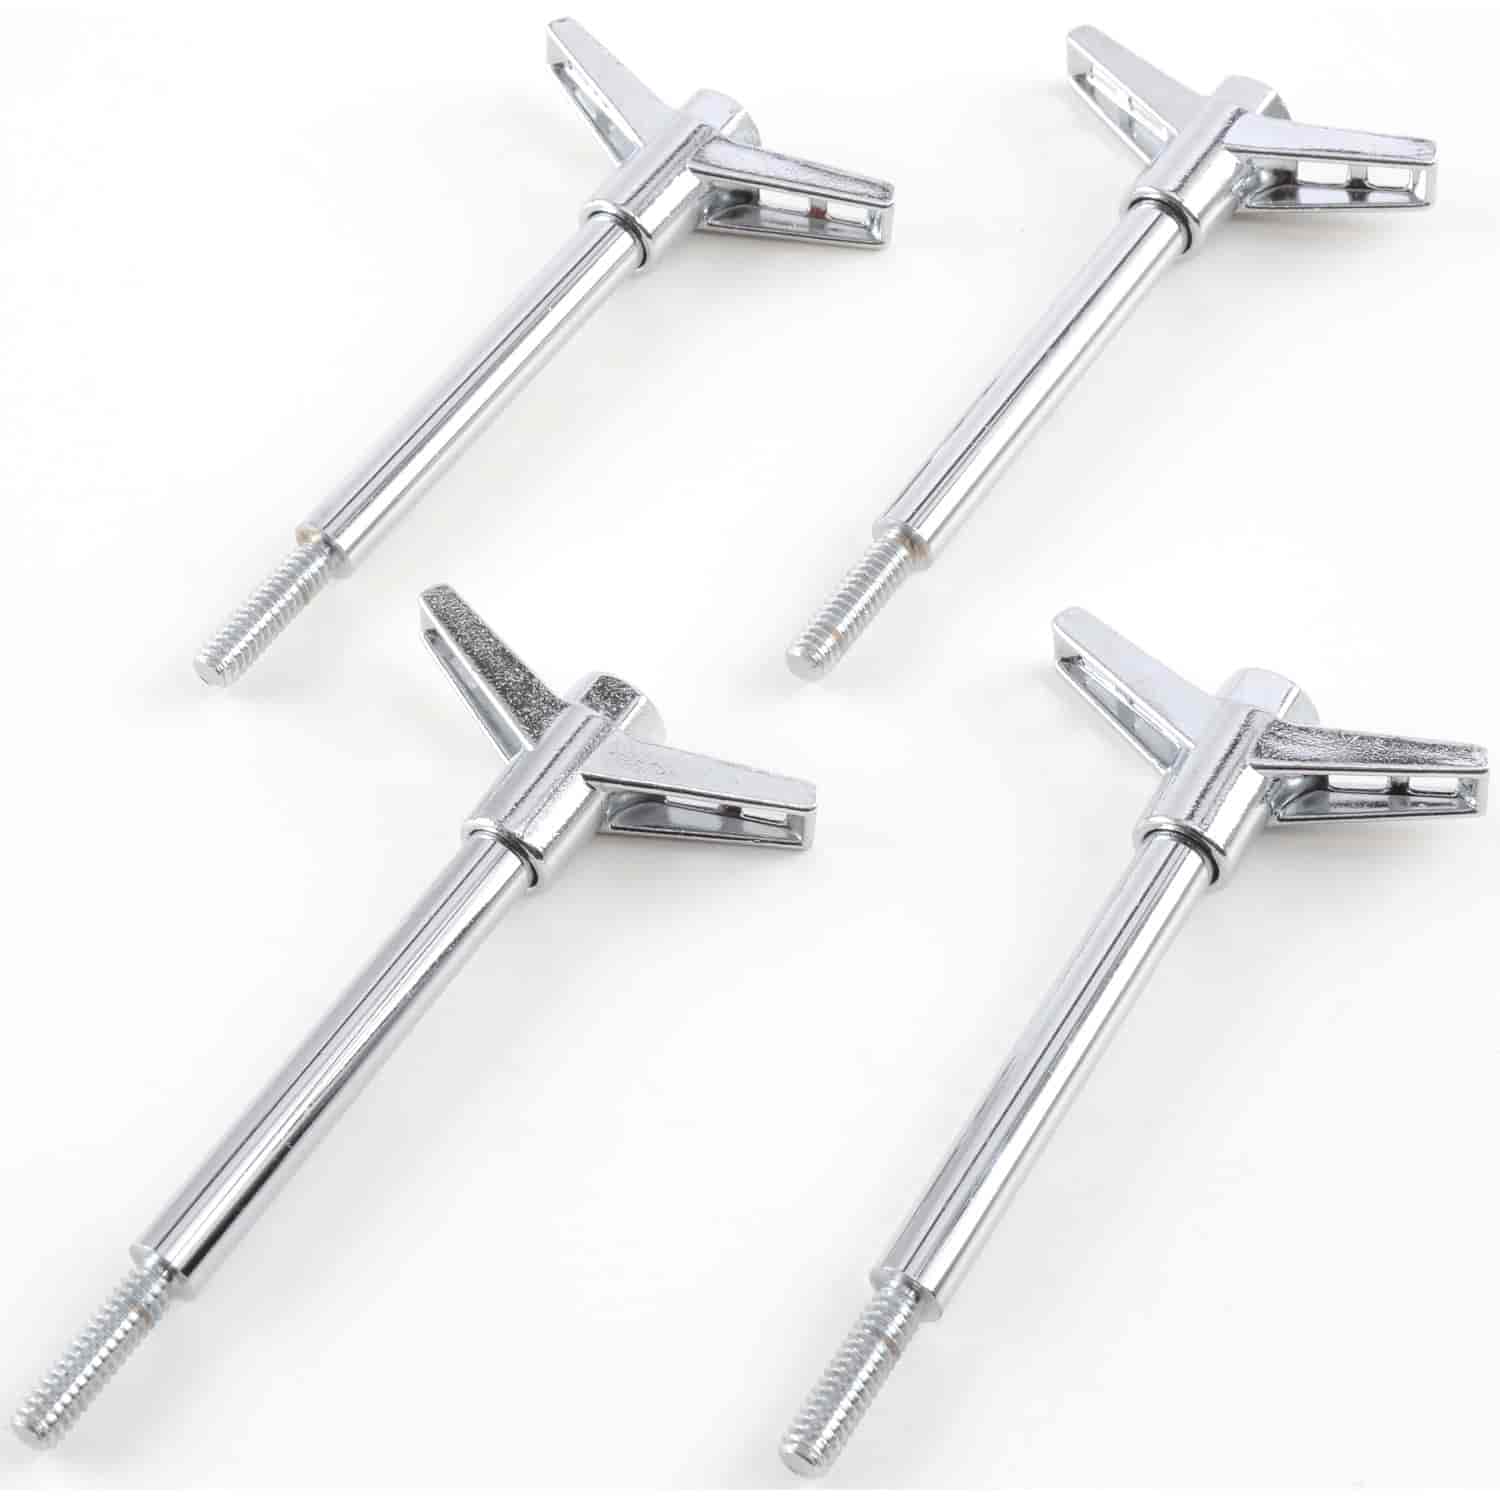 2-Piece Wing Bolts with T-Top, Length of 3-3/4"